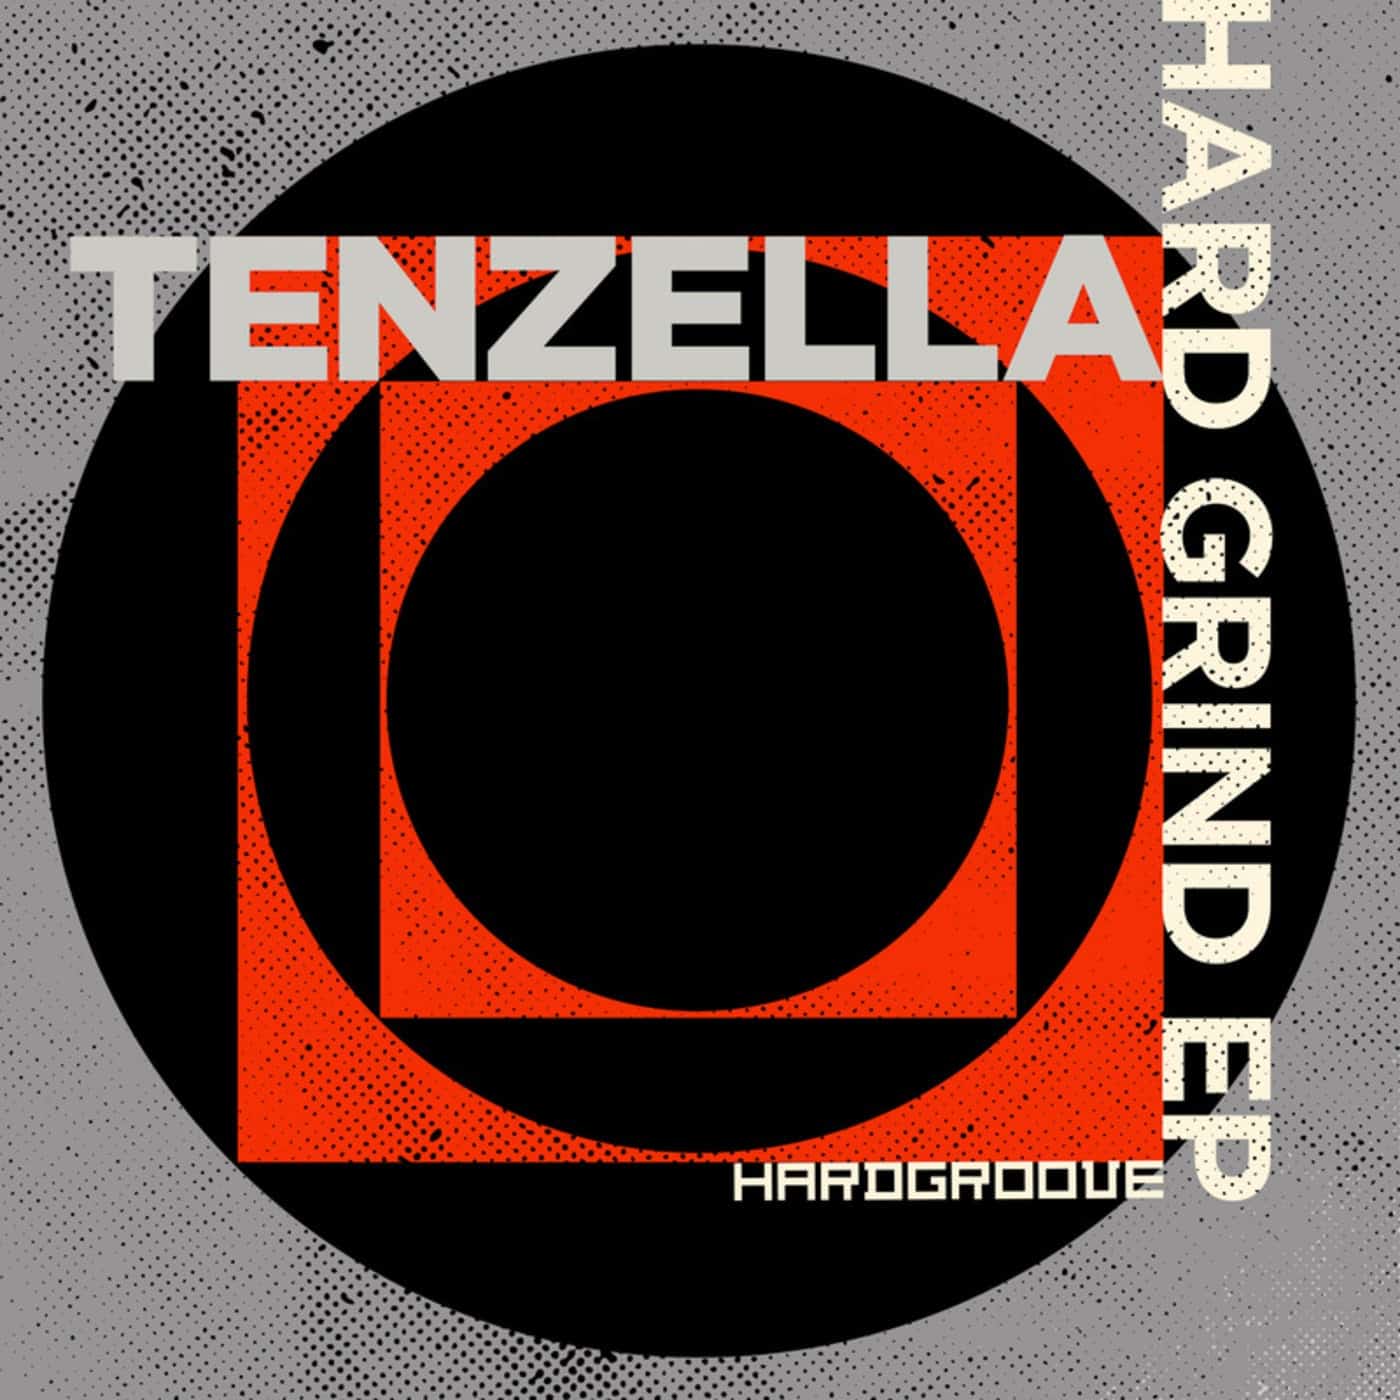 Download Tenzella, Ecilo - Hard Grind EP on Electrobuzz